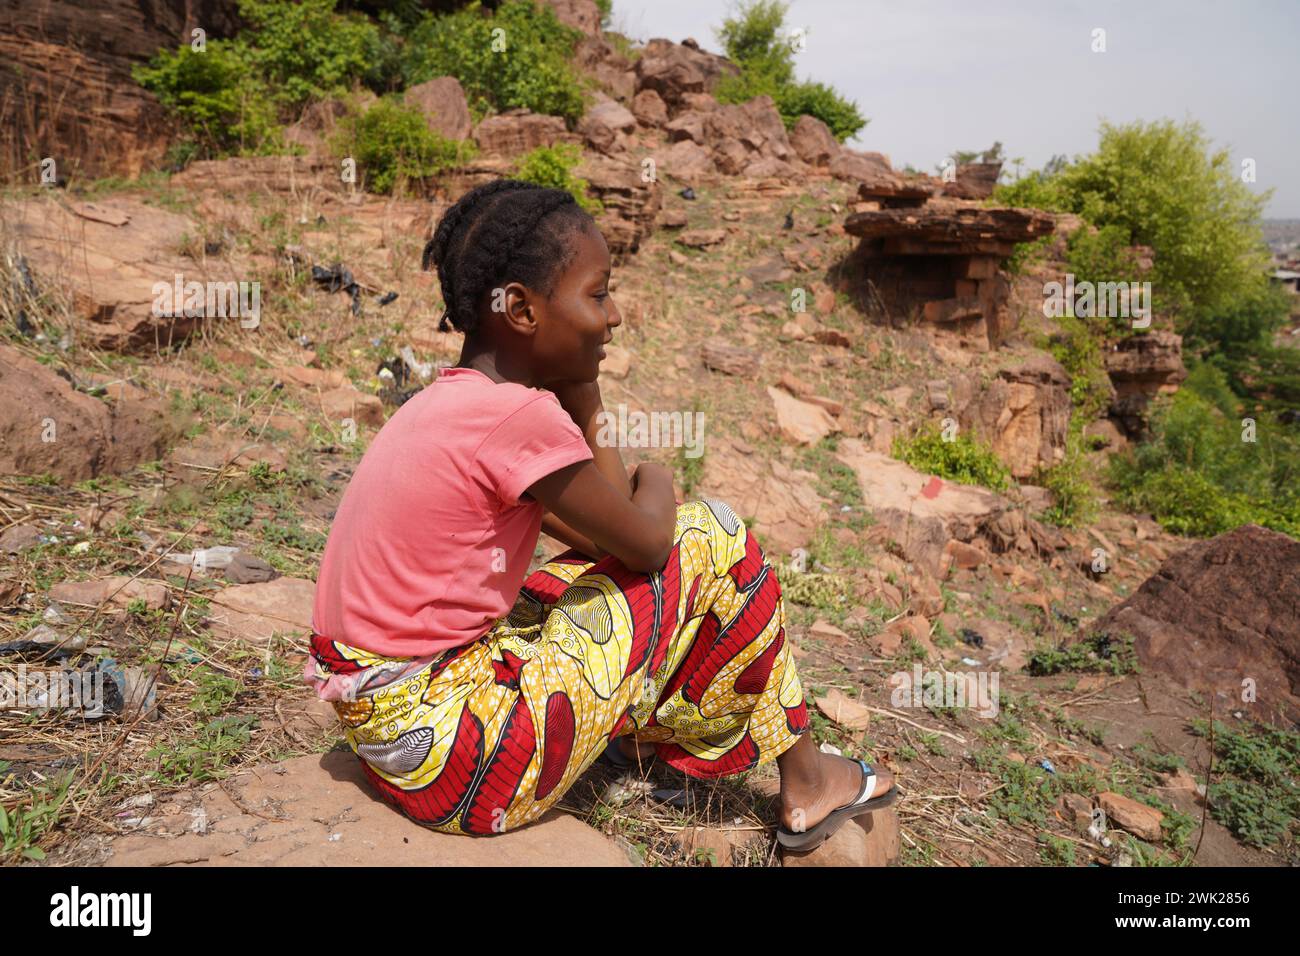 Side view of a serene daydreaming African villagegirl sitting on a rock amidst weeds and brushwood on a sunny day symbolizing differences in lifestyle Stock Photo